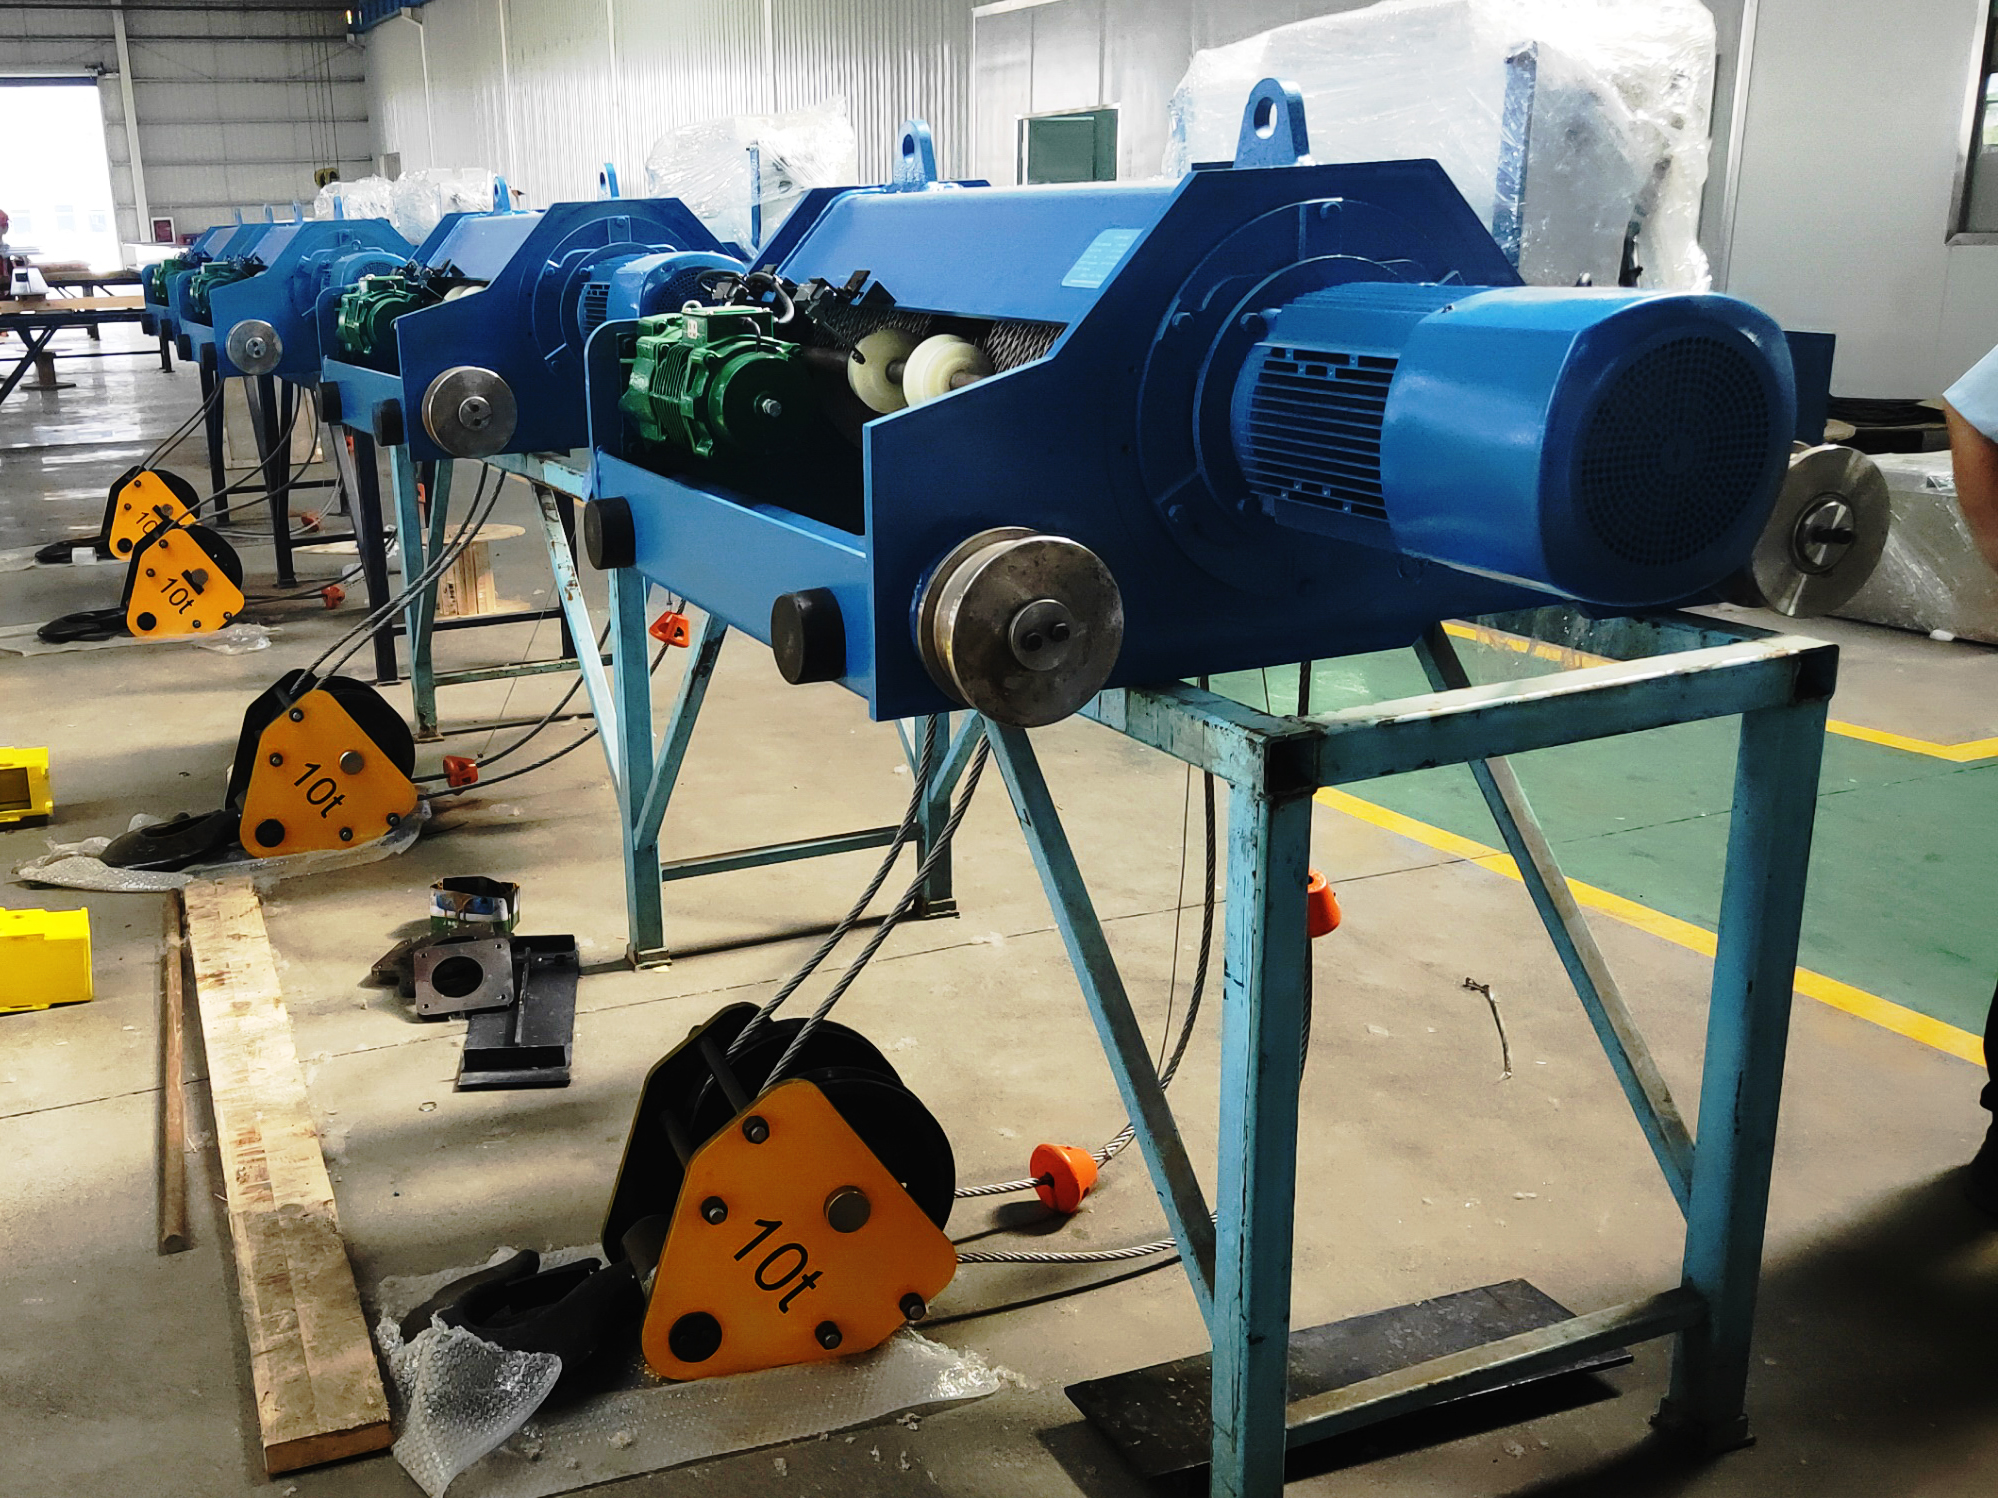 10 Tonne Electric Hoist Used in Foundry - Wire Rope Hoist Manufacturer